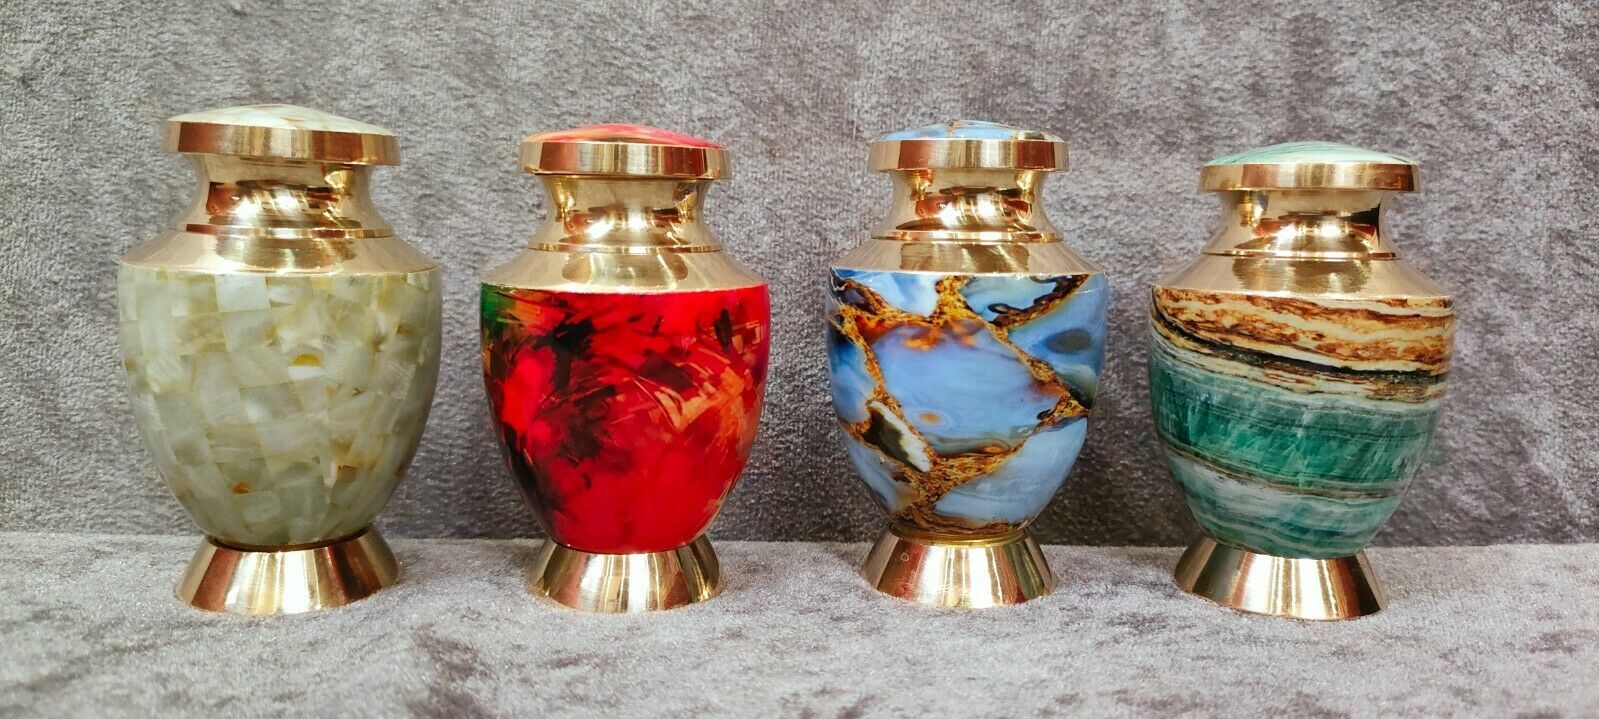 Small Keepsake Urns For Human Adult And Pet Ashes Mini Funeral Urn Made By Brass